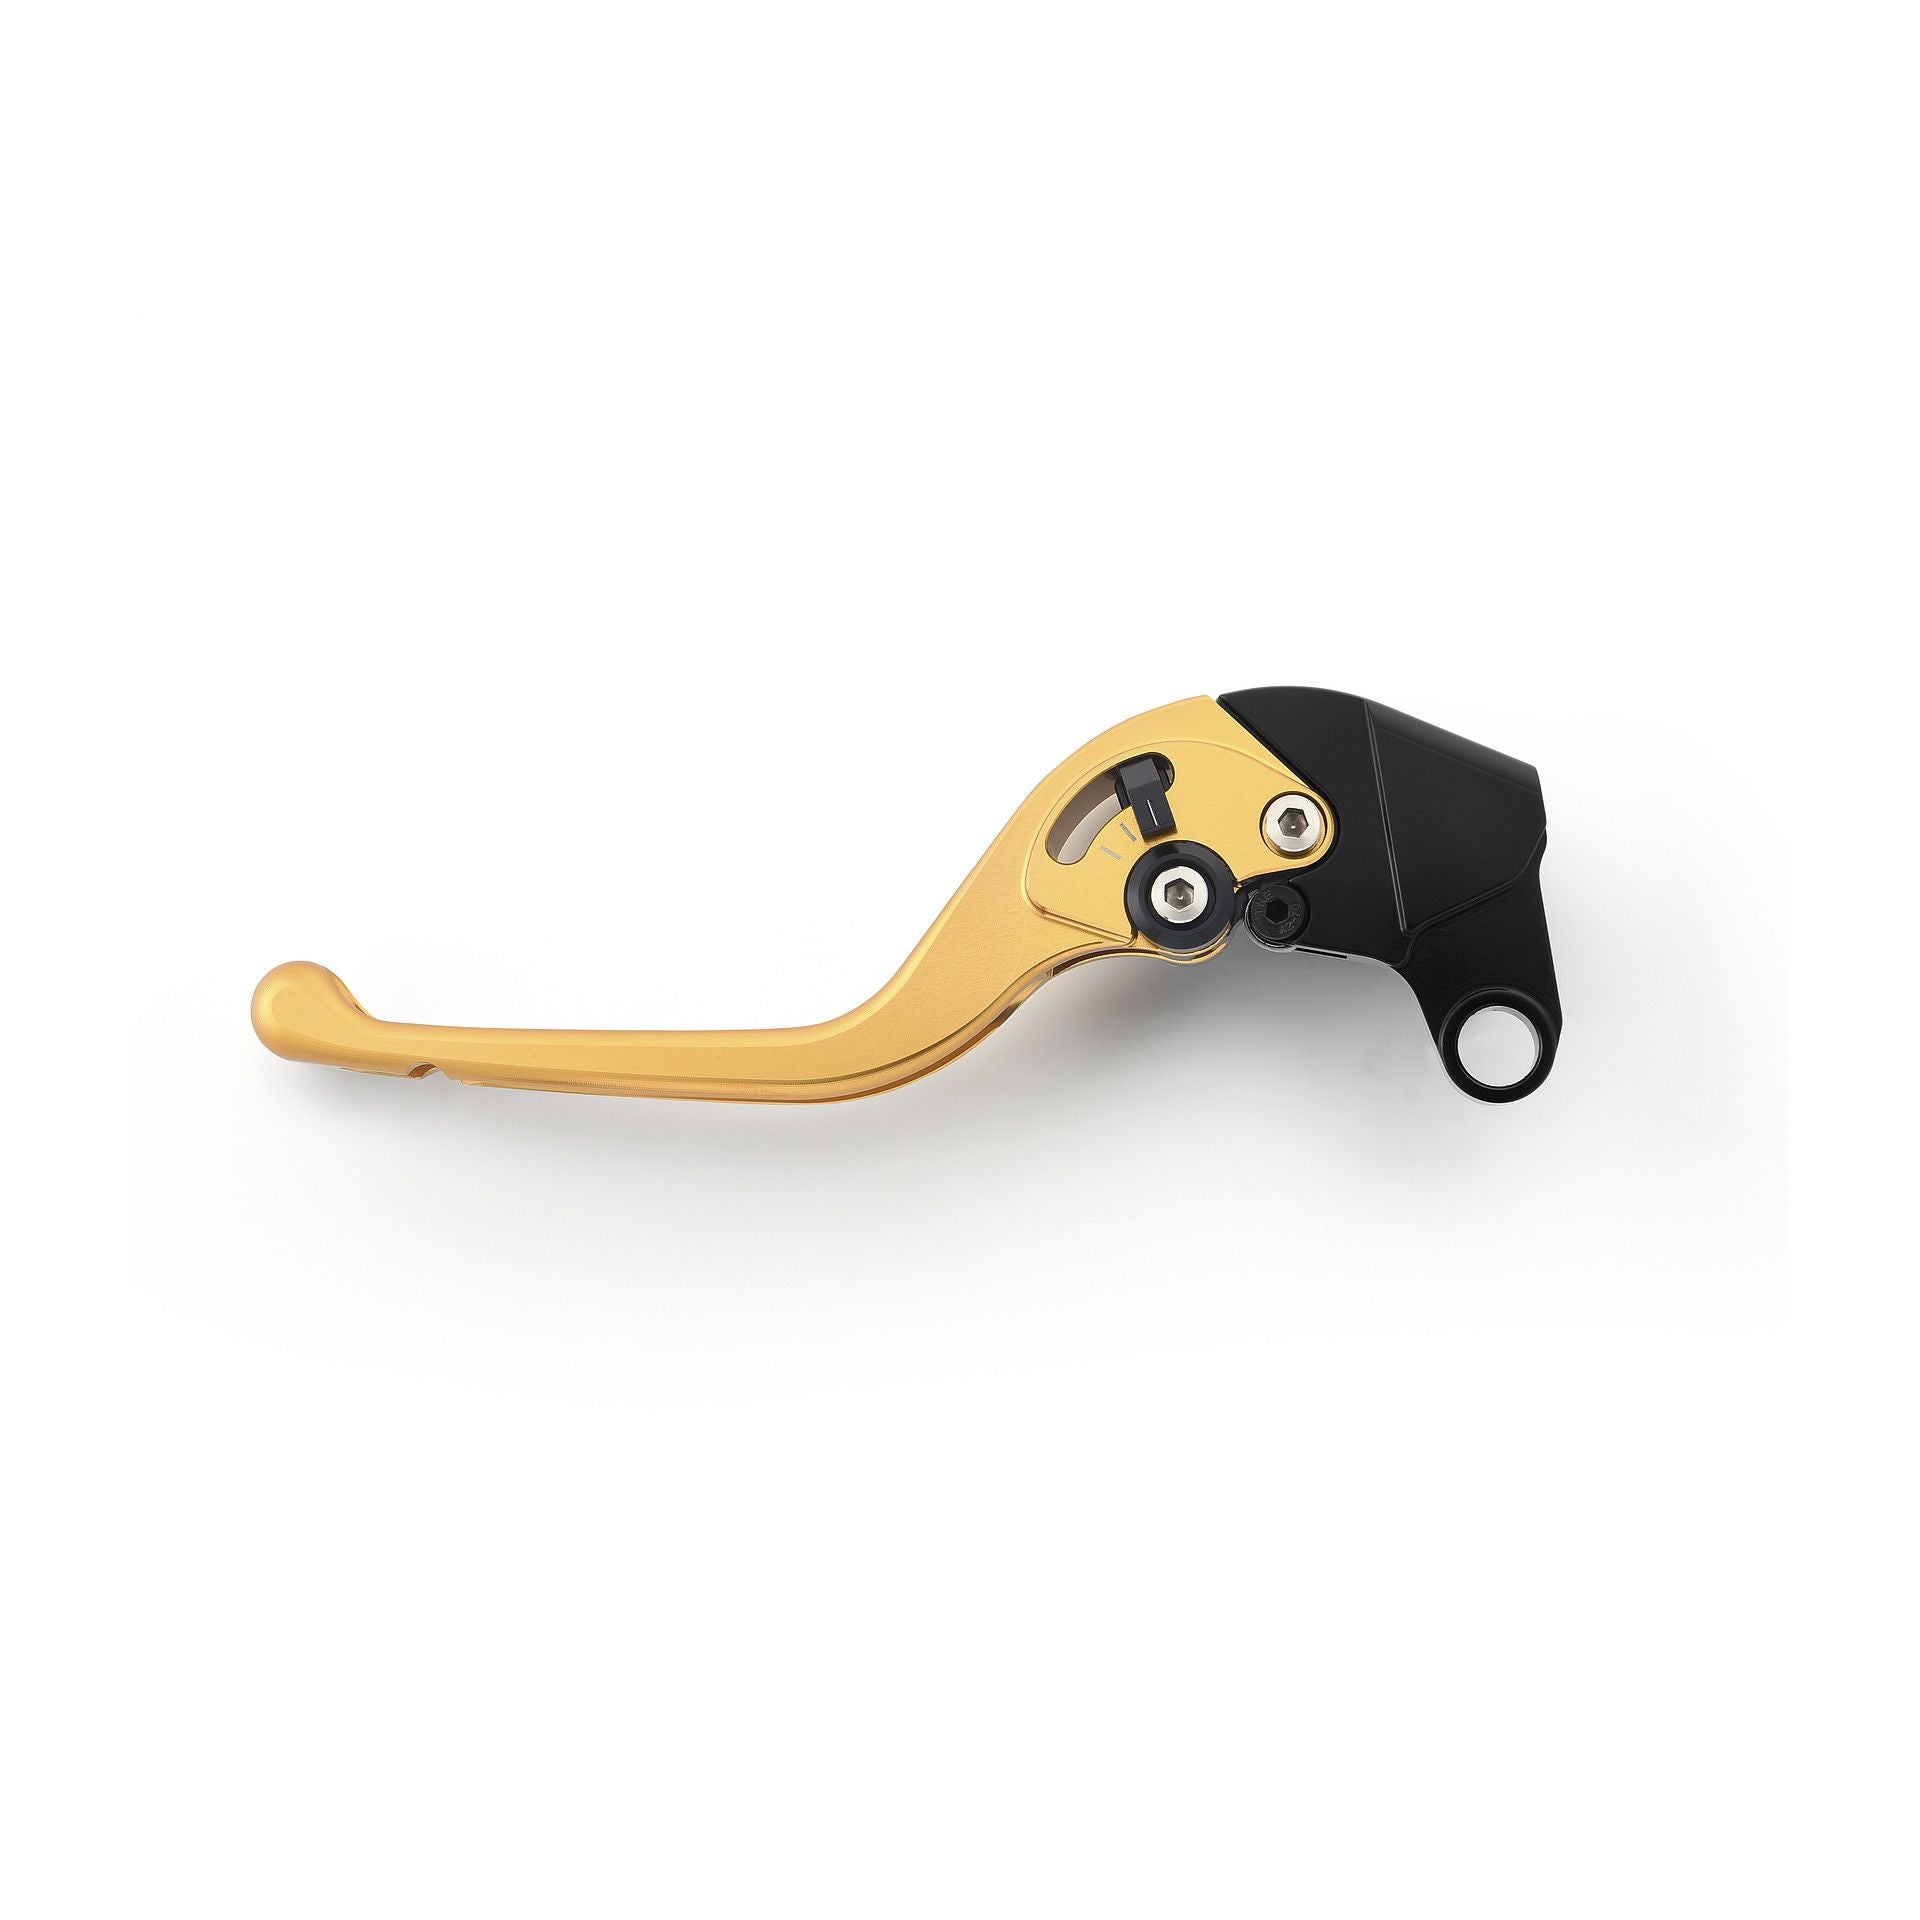 Rizoma RRC Clutch Lever LCR702G - Fire Gold